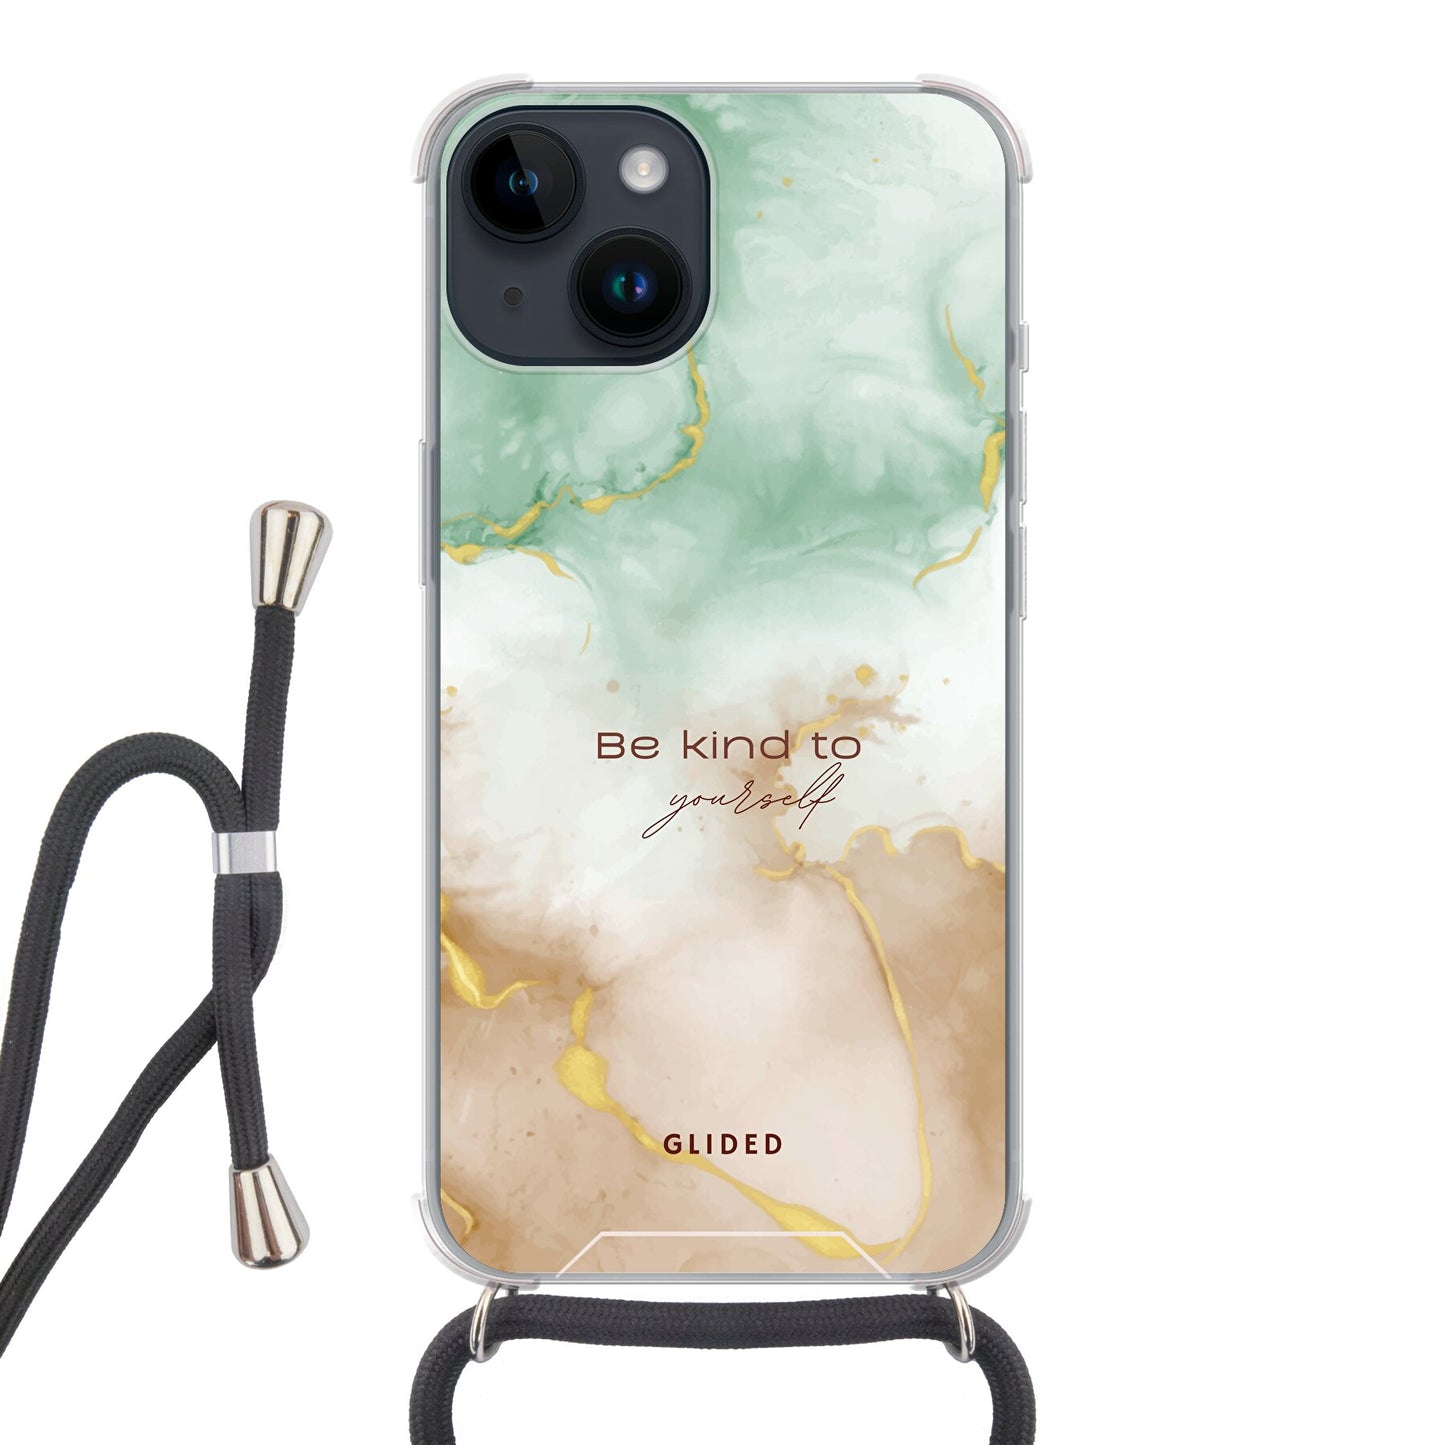 Kind to yourself - iPhone 14 Handyhülle Crossbody case mit Band